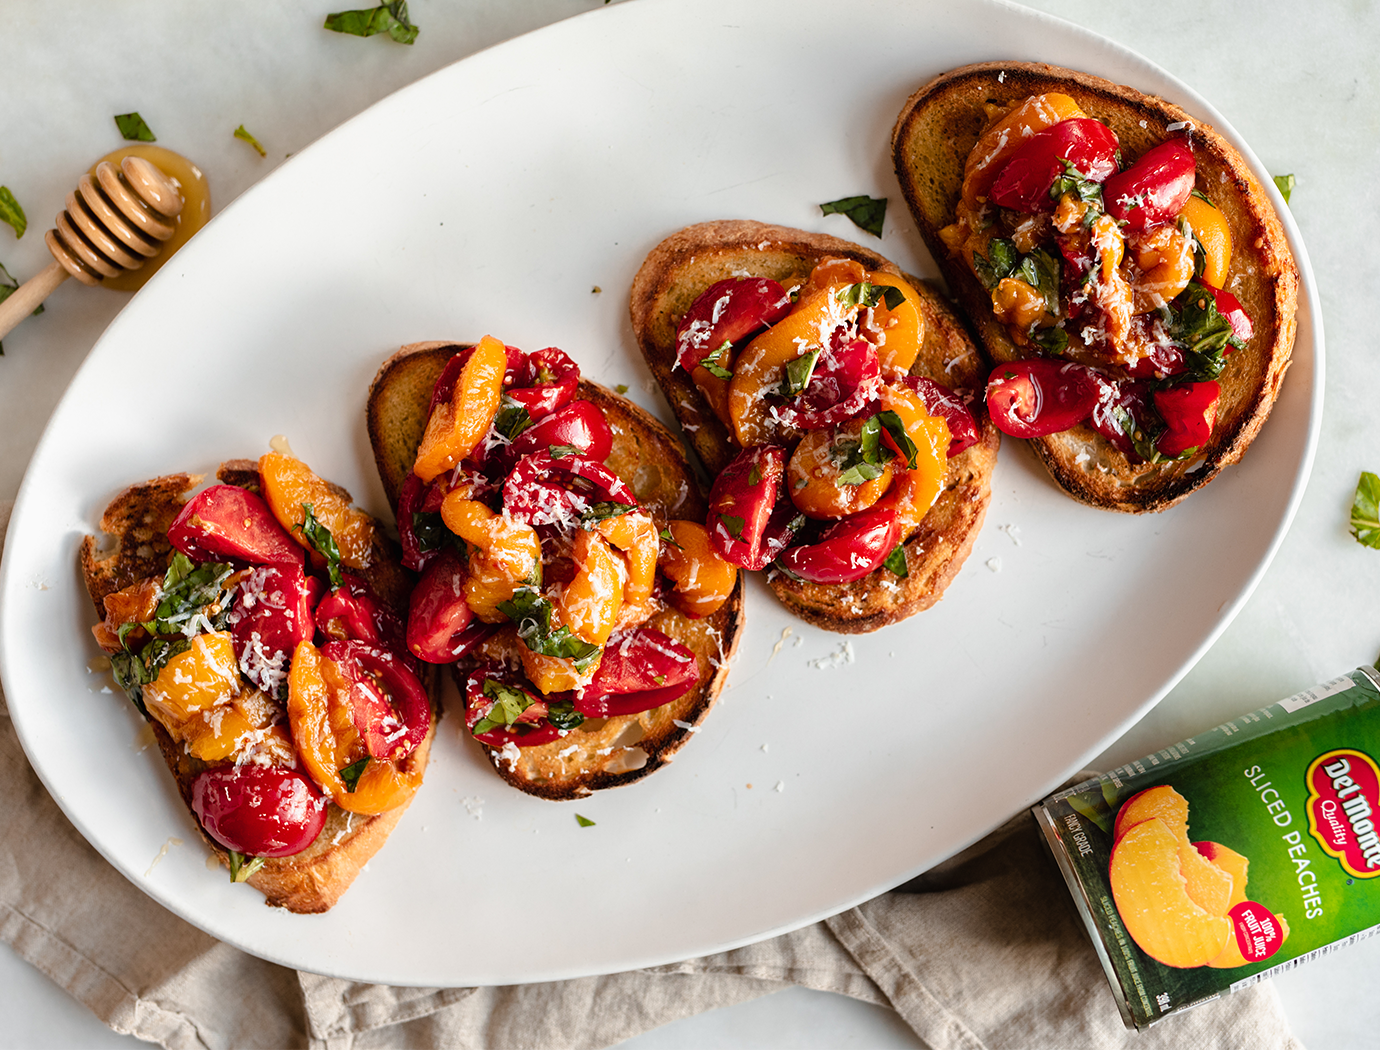 Caramelized Peach, Tomato & Basil Bruschetta - inspired by the Julie and Julia movie